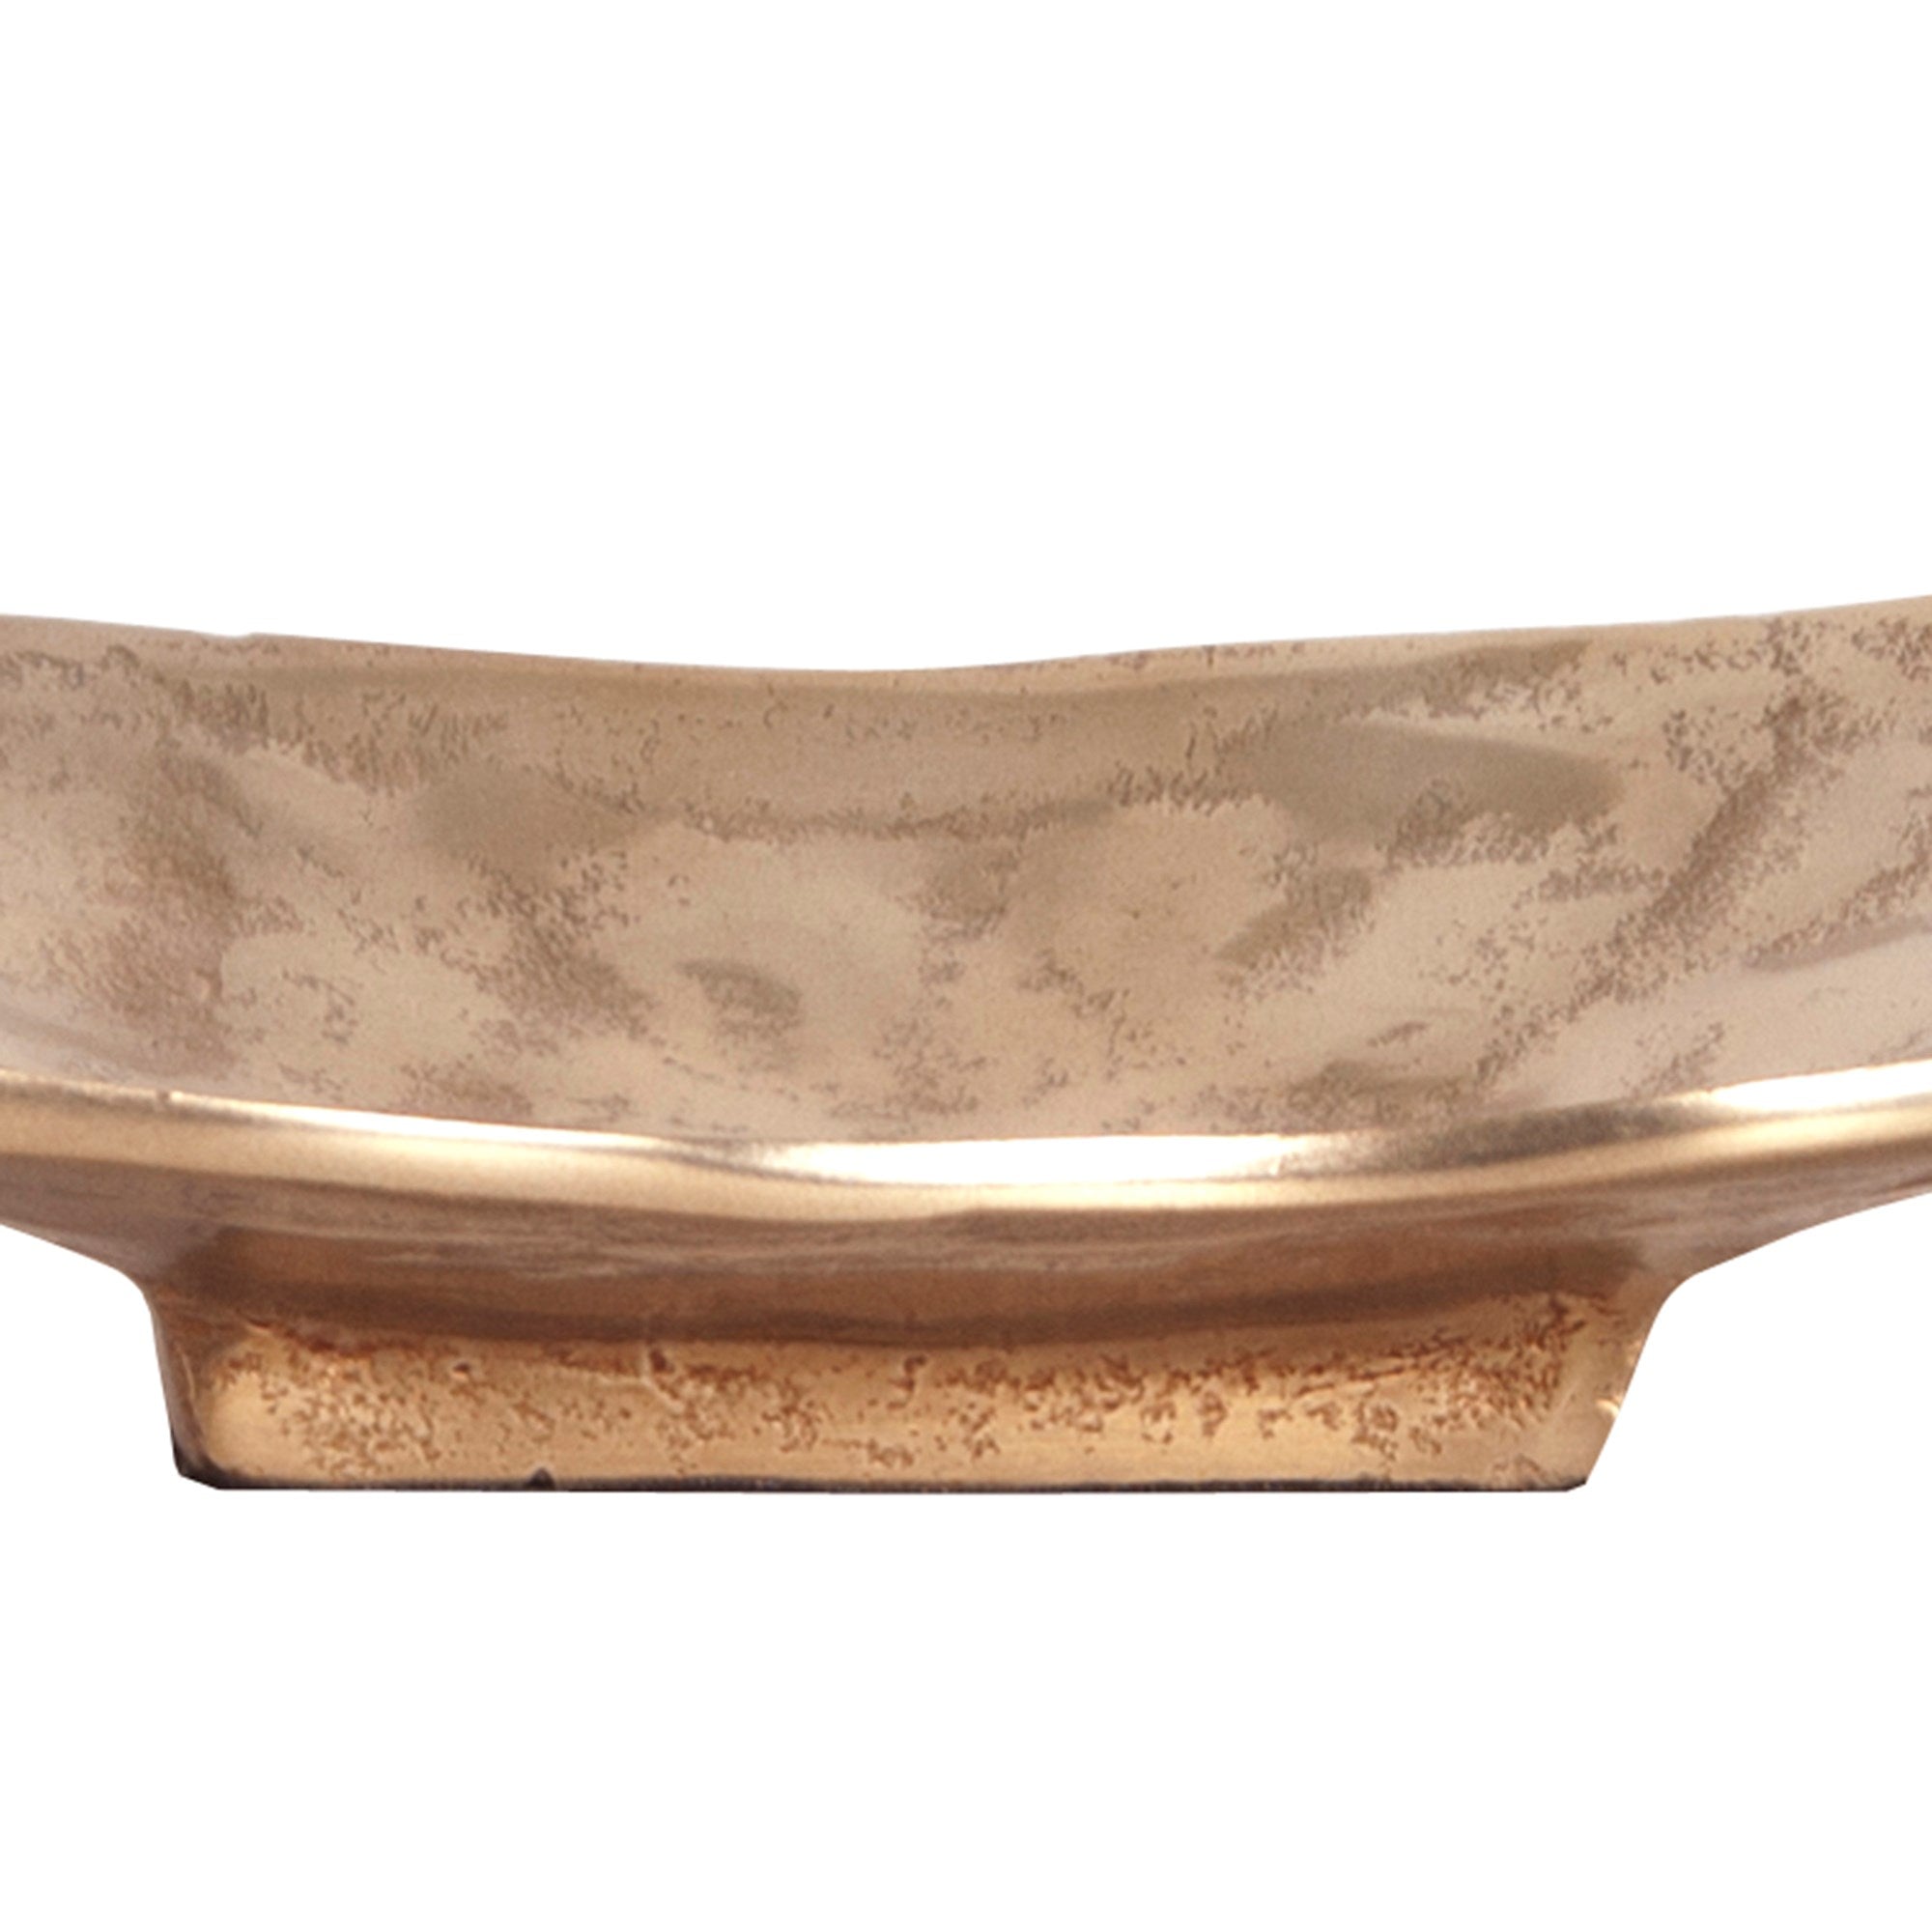 Gold Scrolled Metal Tray / Wall Art - Small